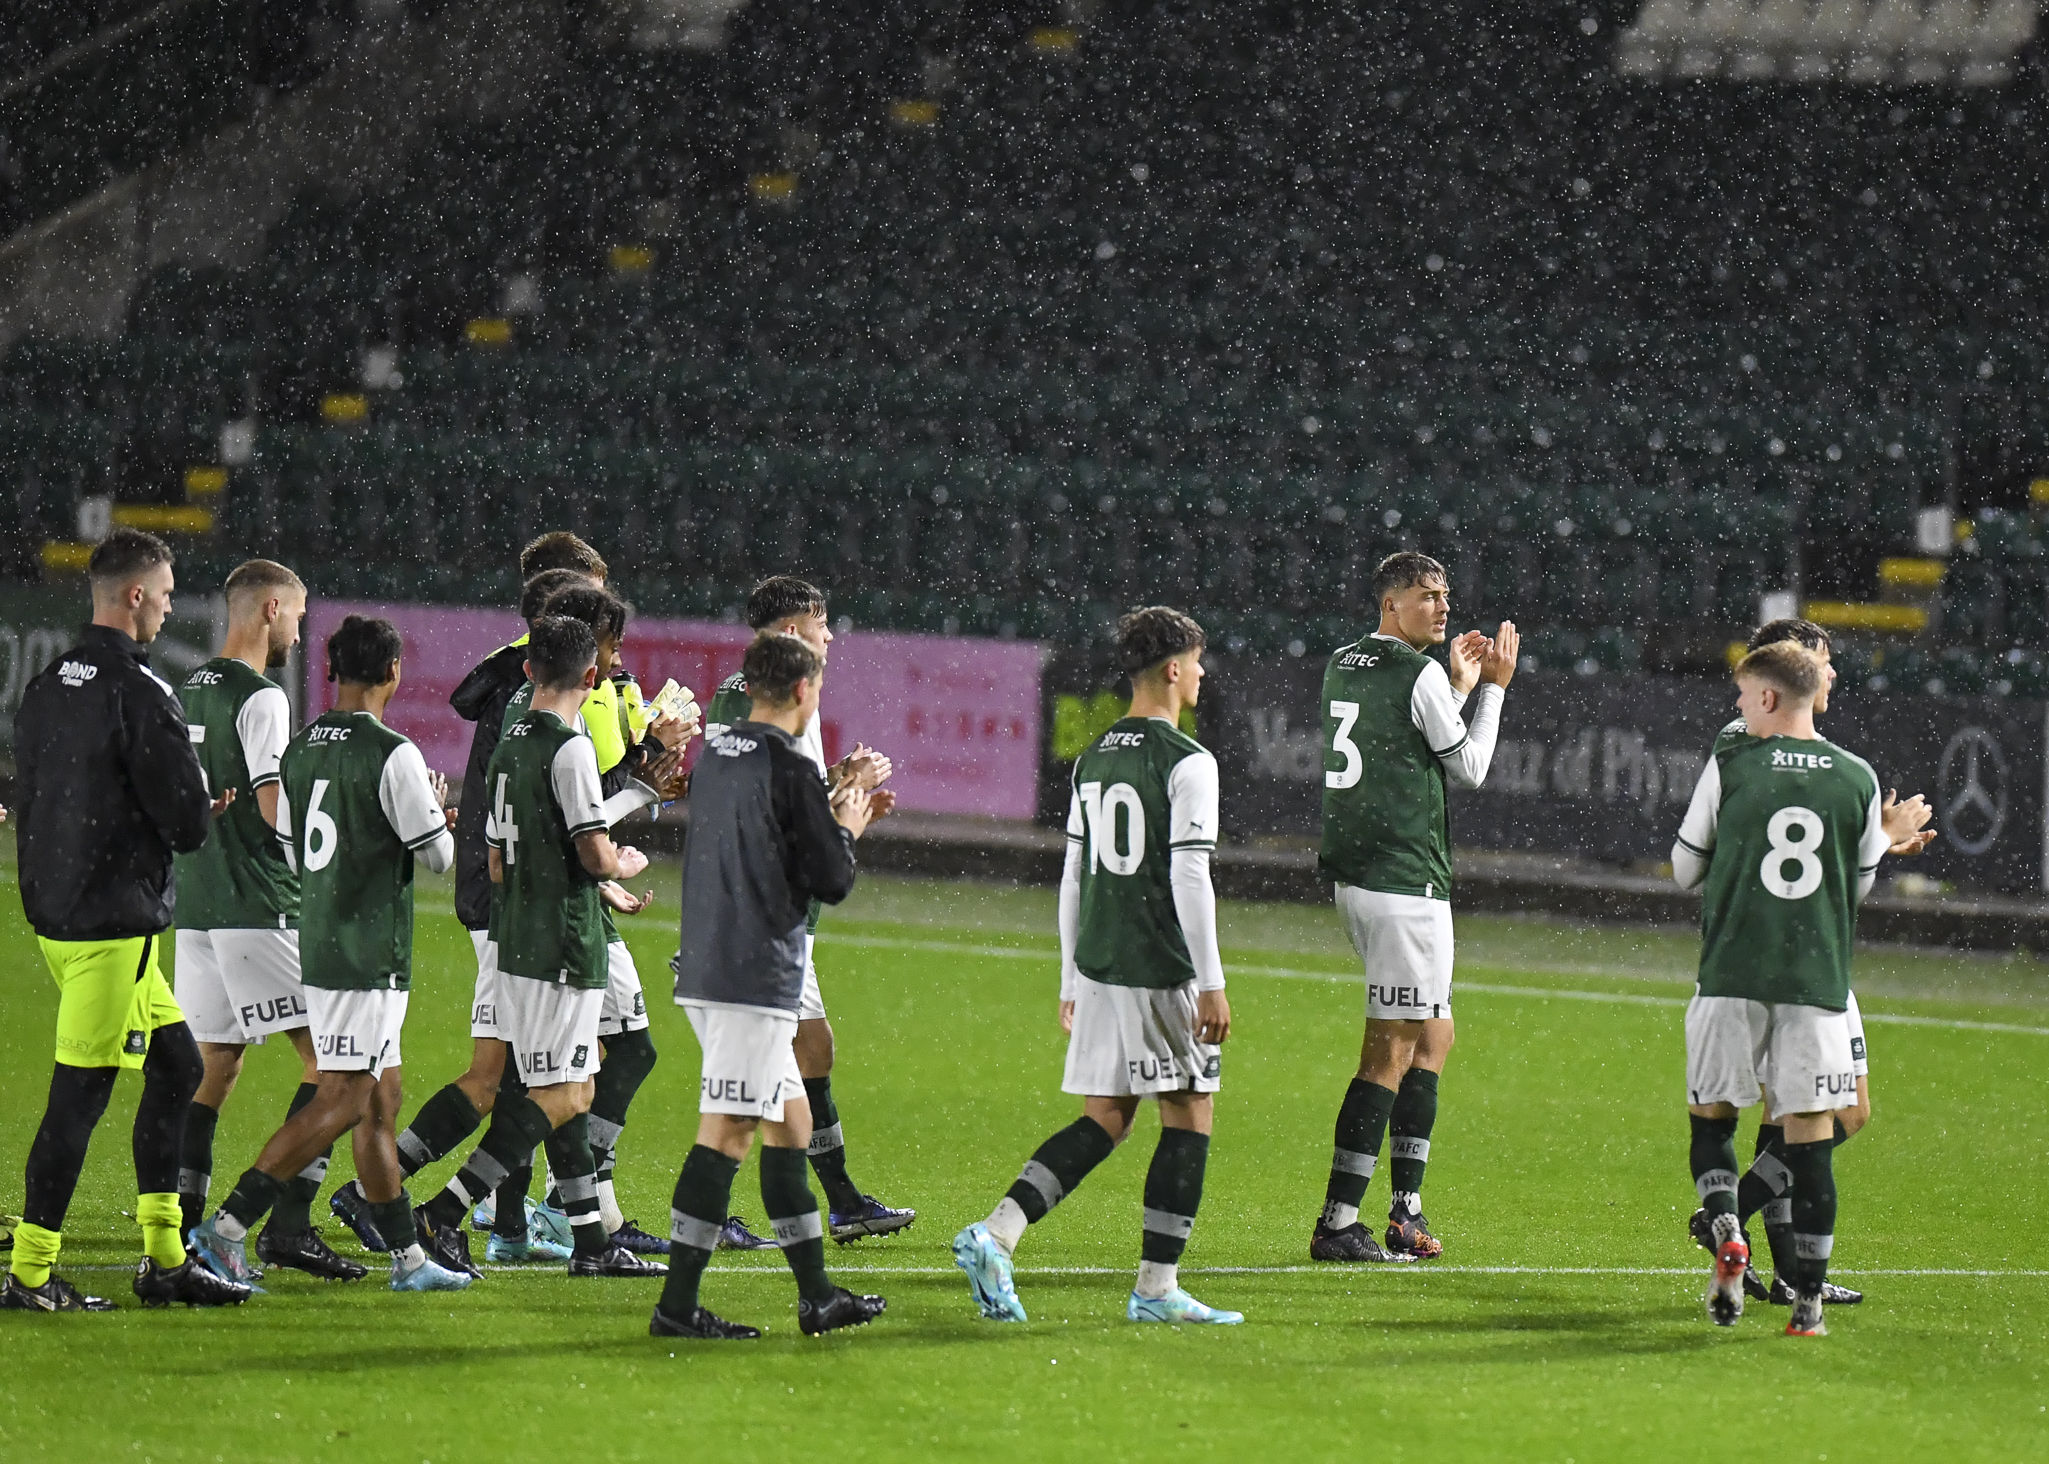 Argyle Academy applaud fans as game is postponed